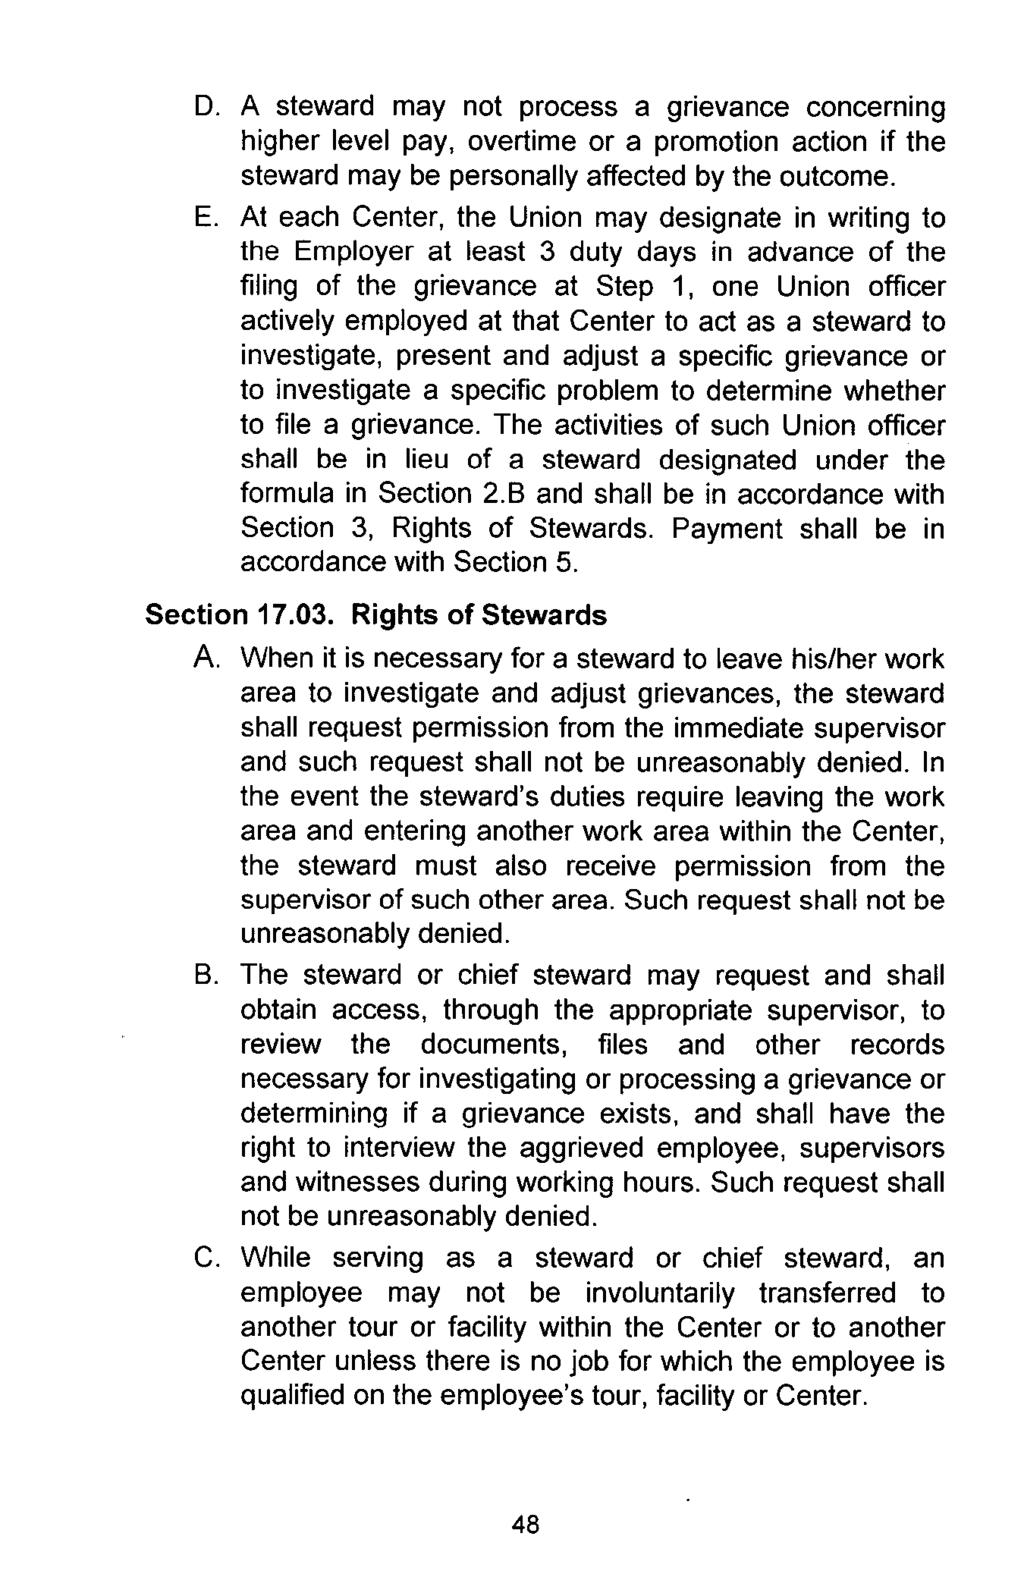 D. A steward may not process a grievance concerning higher level pay, overtime or a promotion action if the steward may be personally affected by the outcome. E.